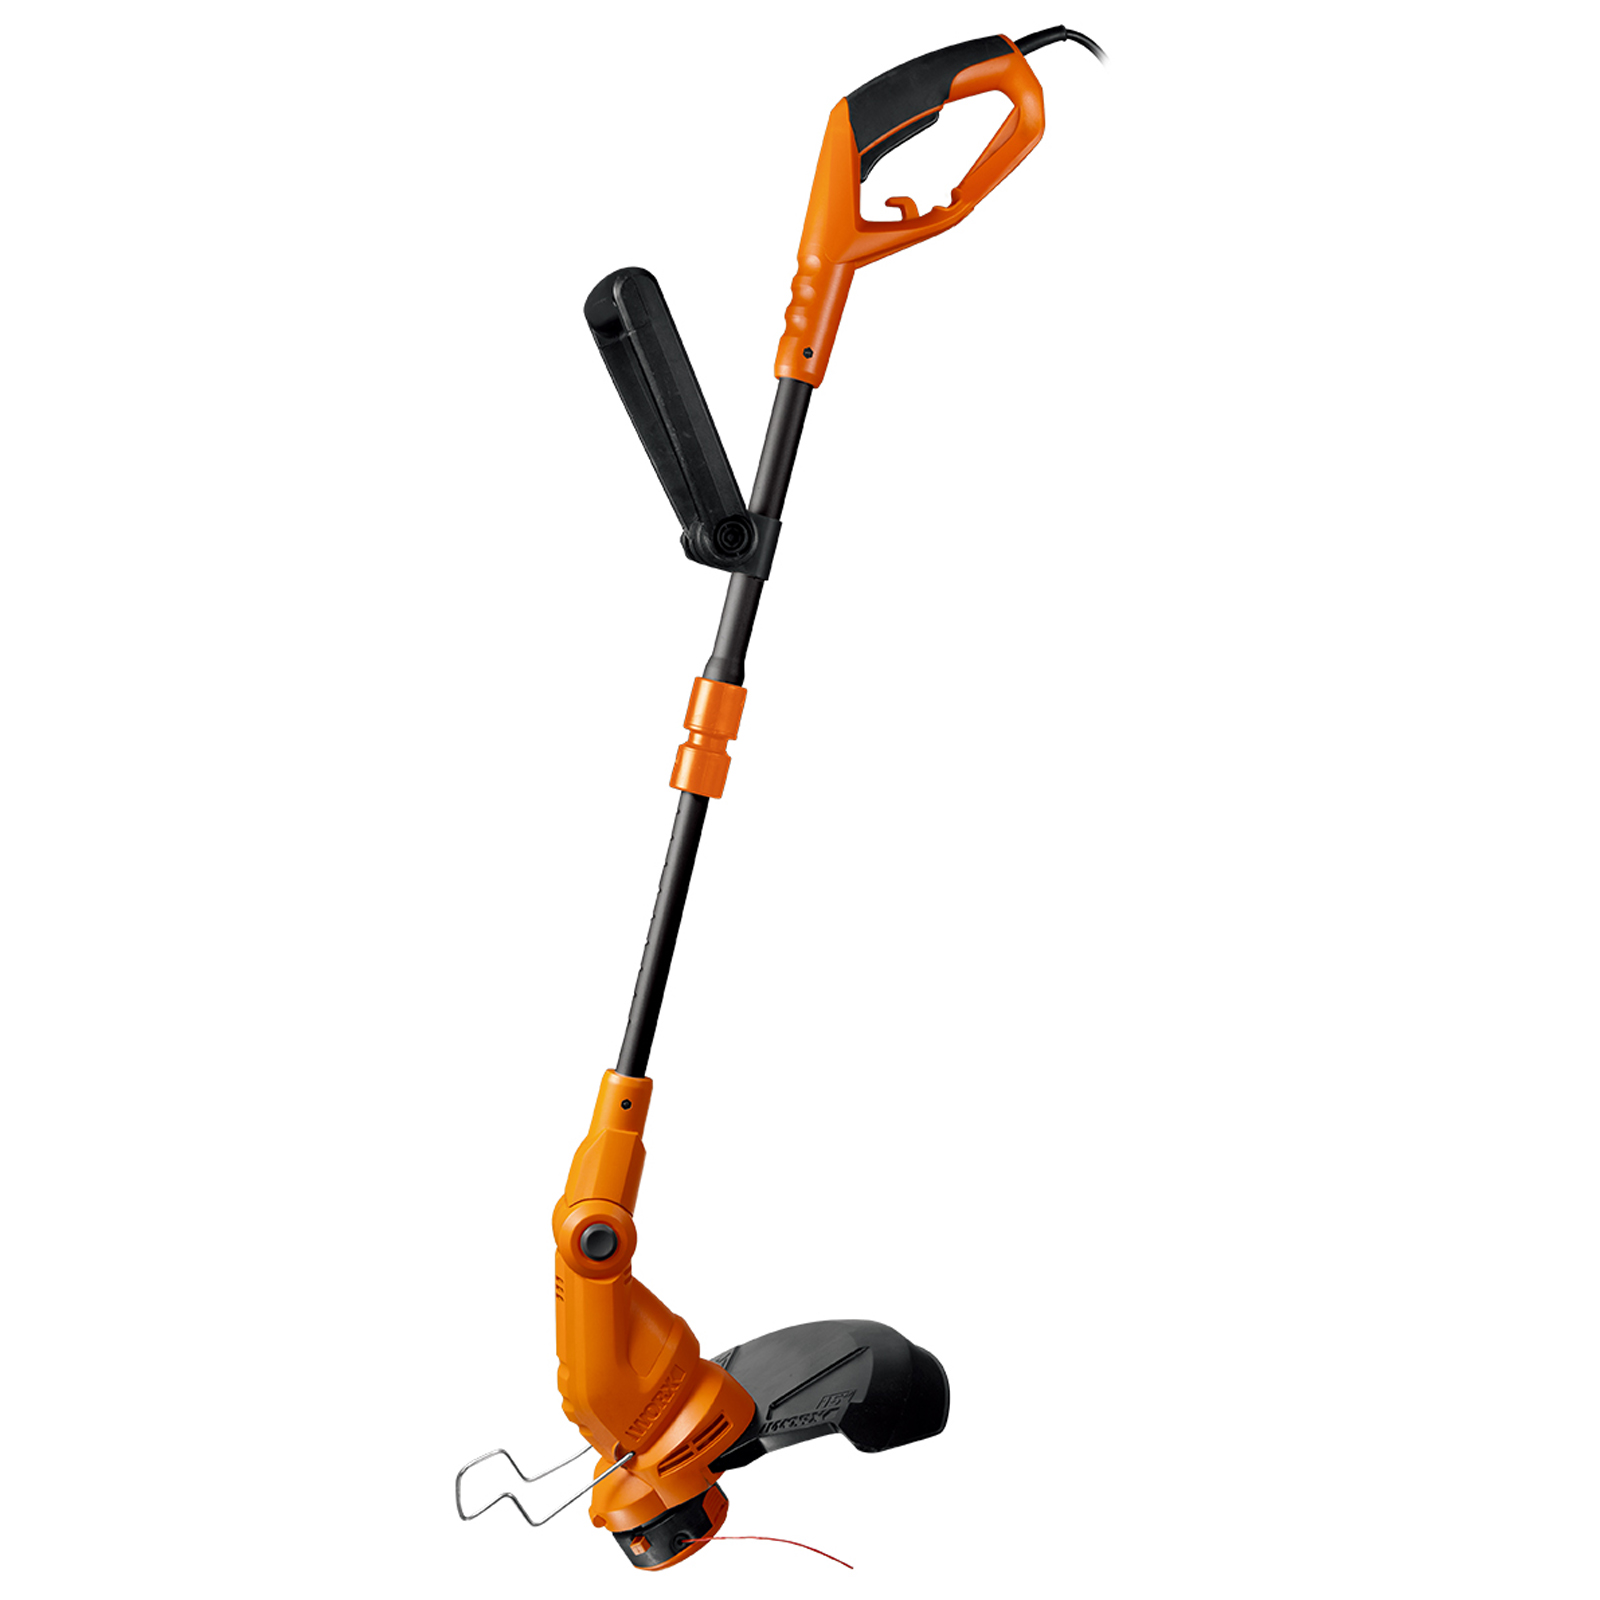 Worx WG119 5.5A - Electric Grass Trimmer